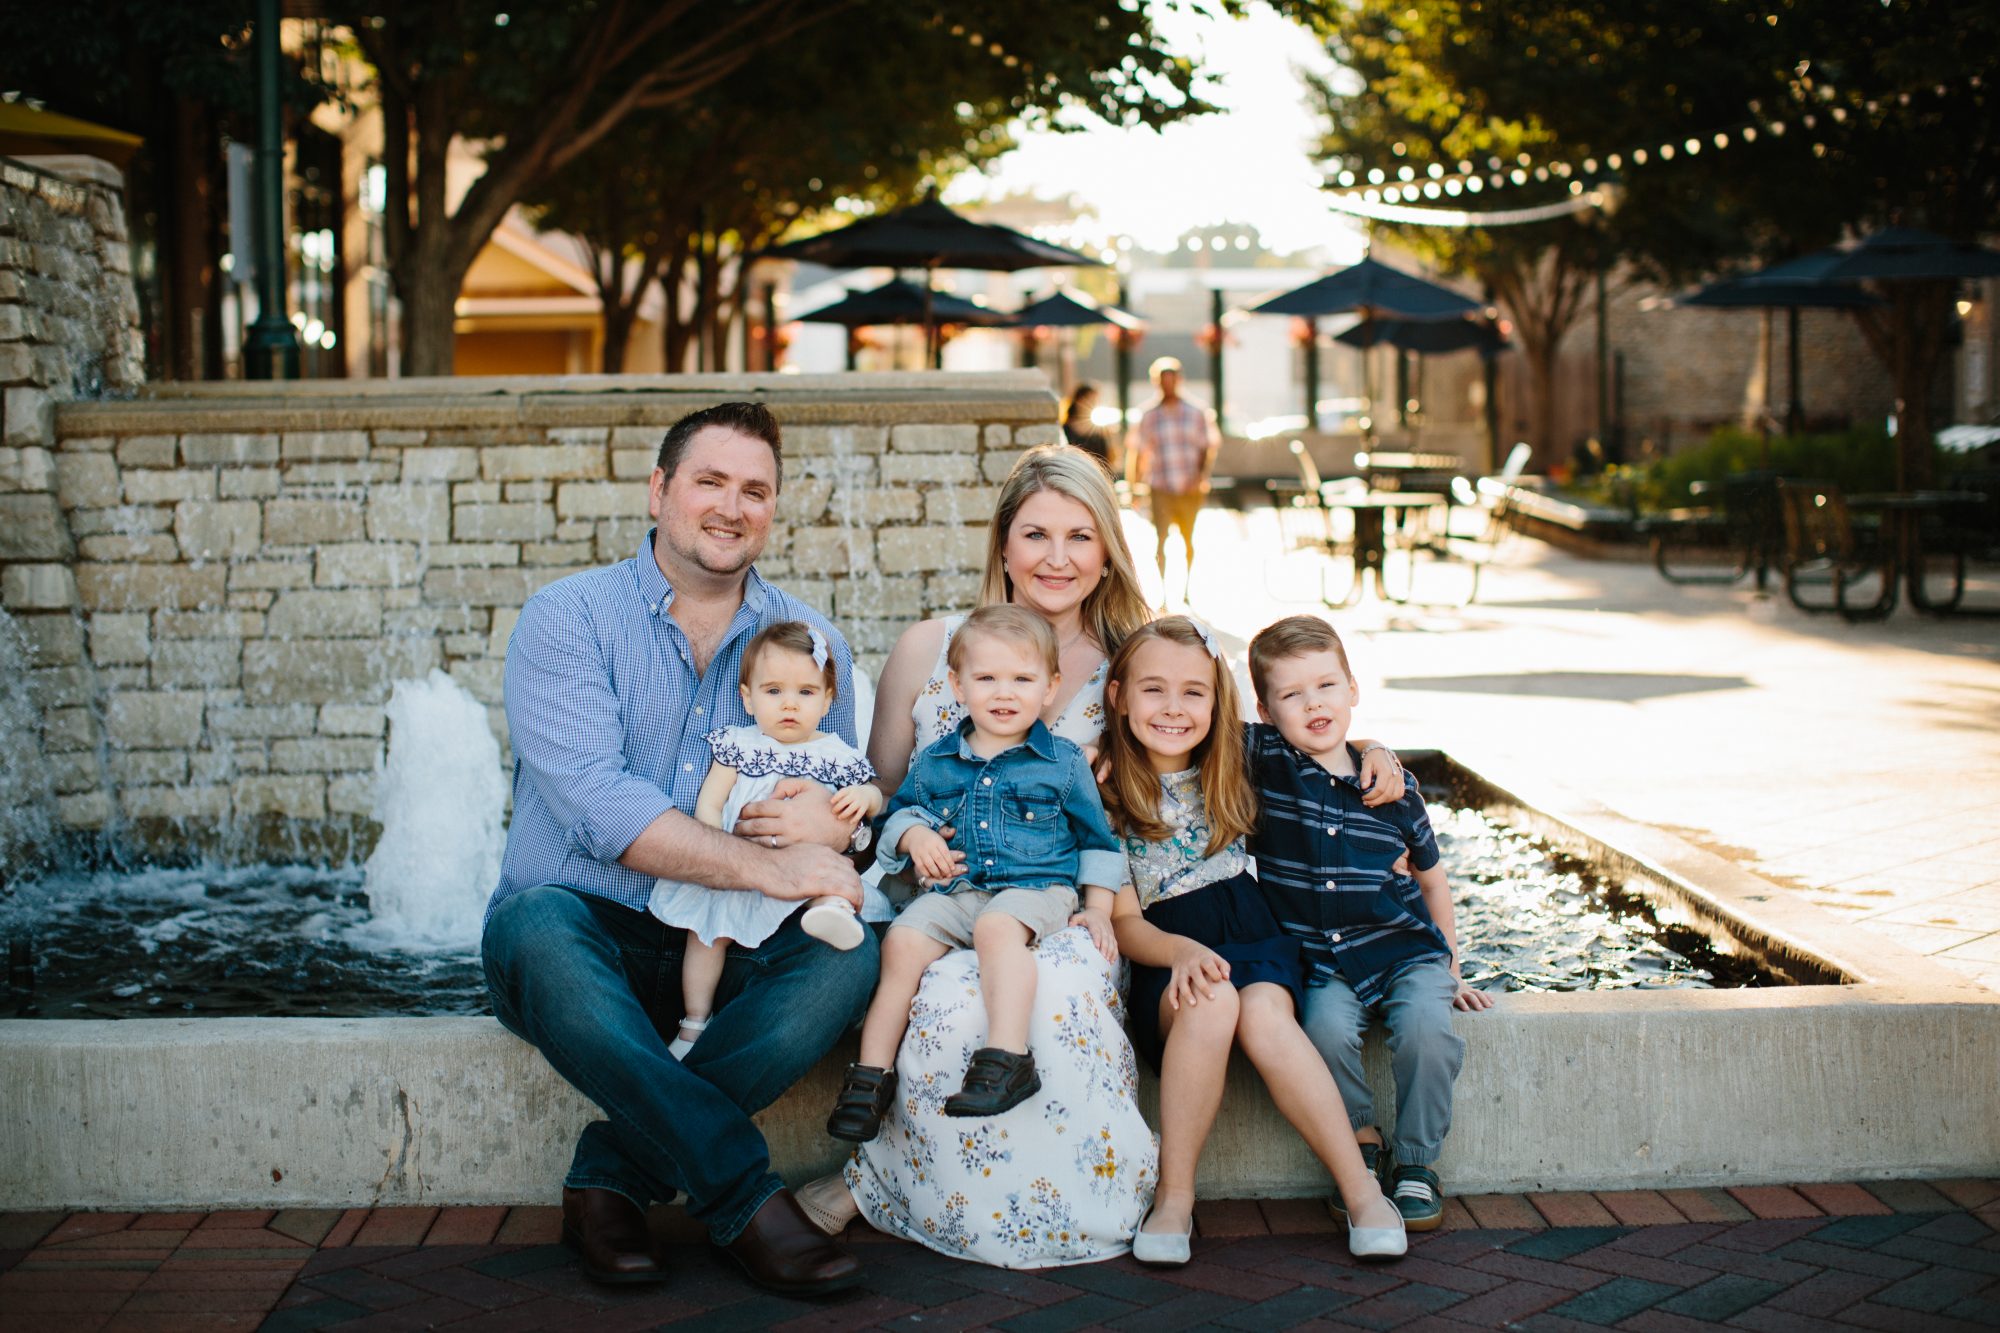 St. Charles IL Photographer | Patricia Anderson Photography